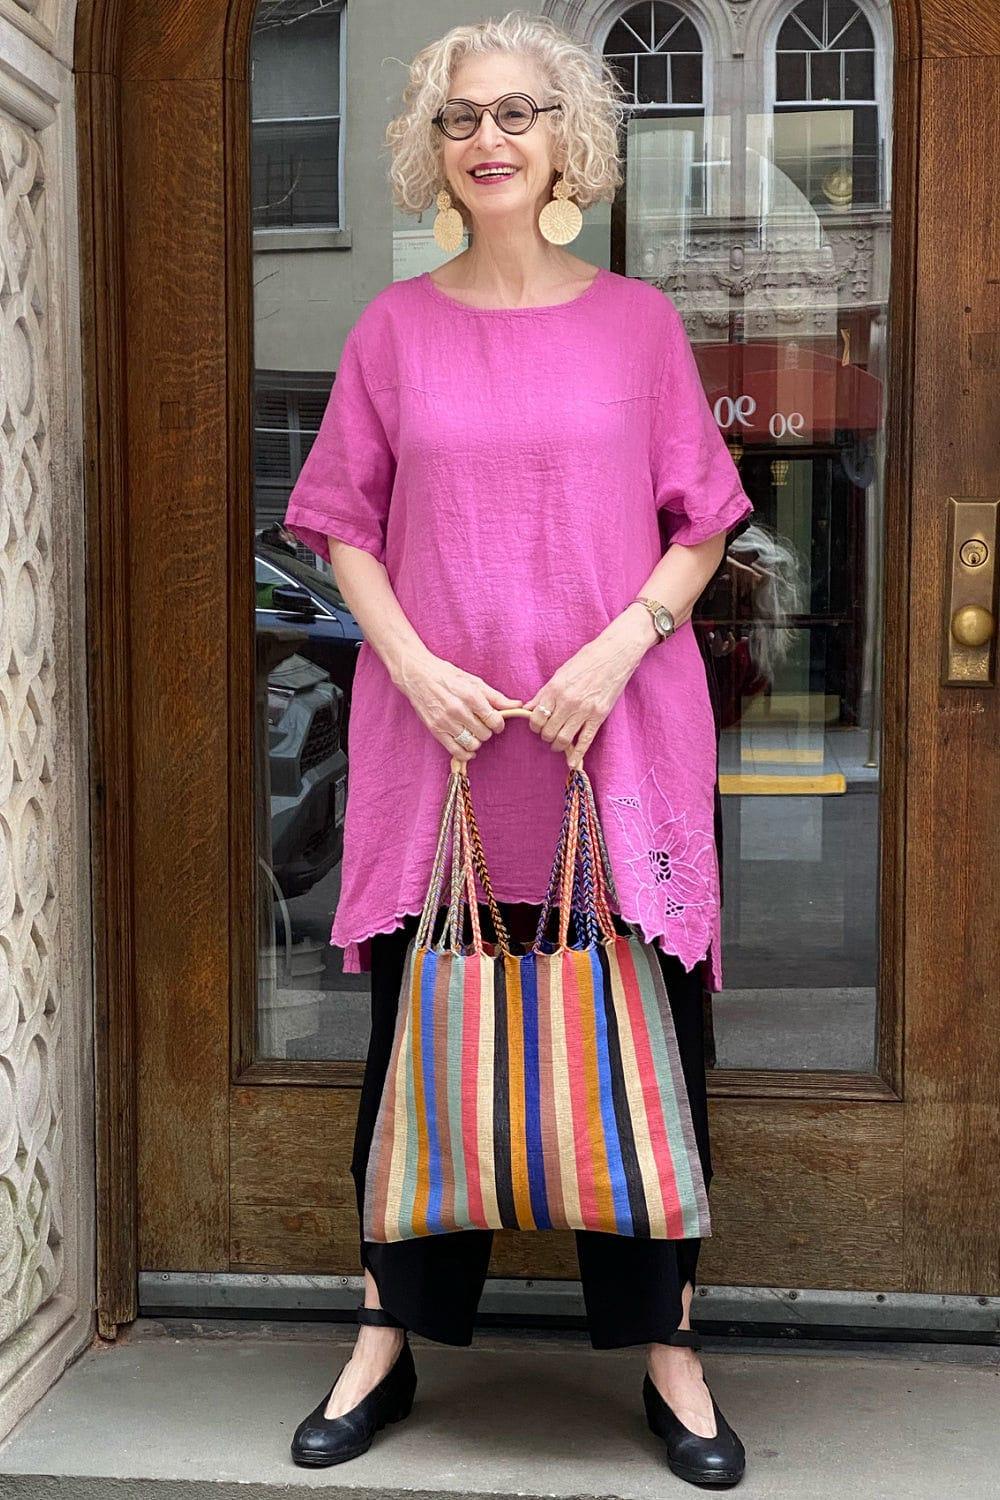 Pretty mature woman smiling and wearing loose fit casual clothing. She is holding a multi color stripe tote bag, and wearing a bright pink short sleeve linen tunic.